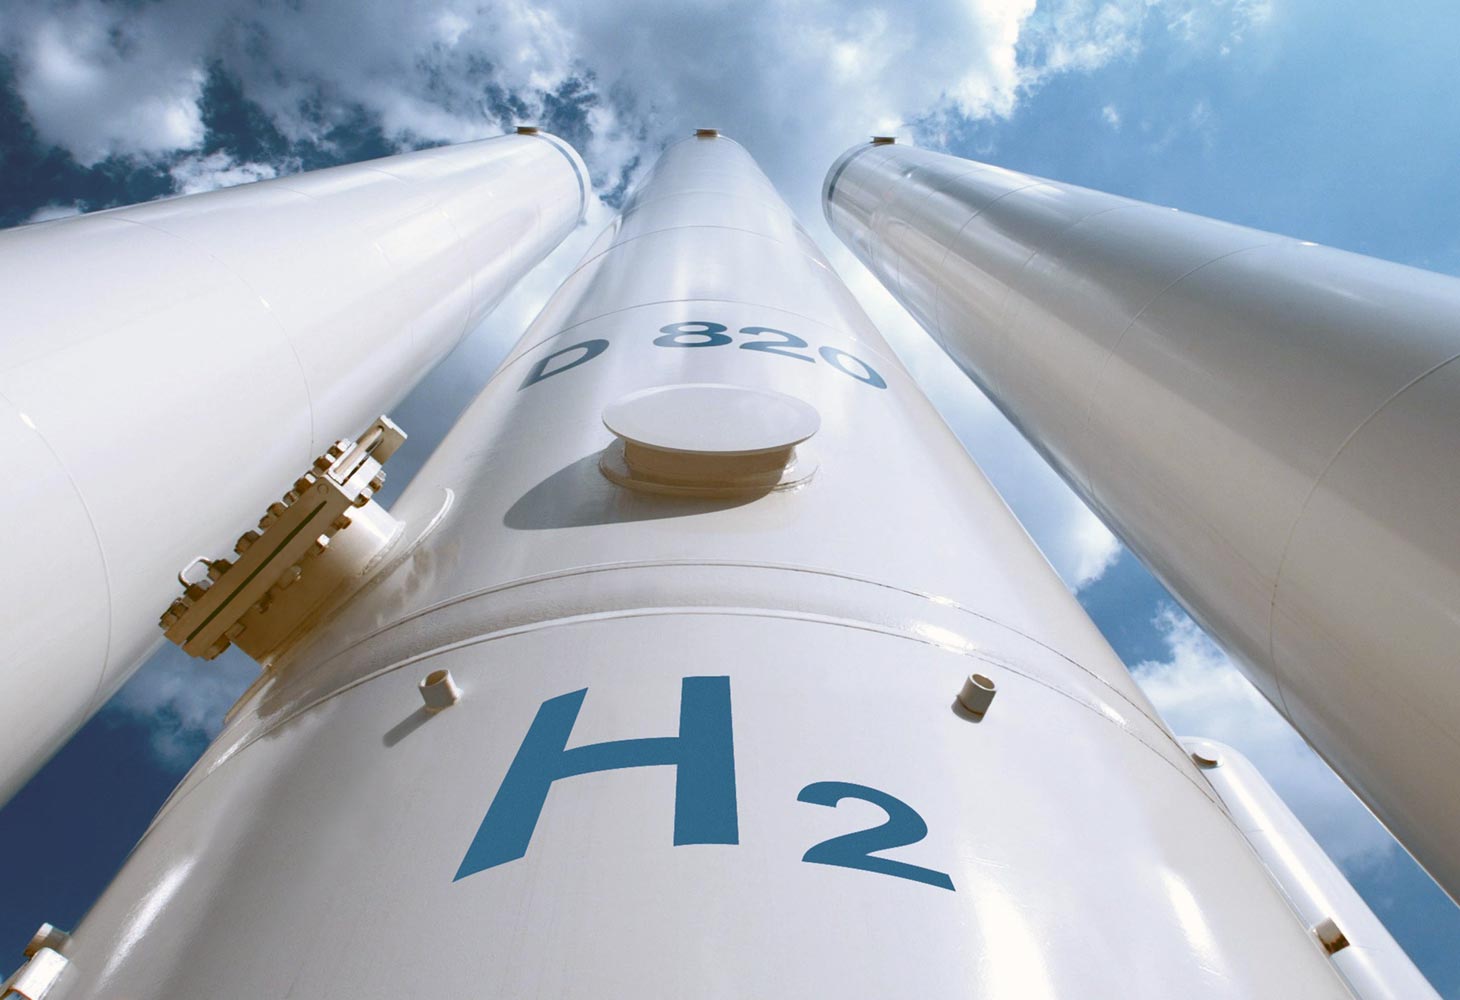 MHI invests in Australia’s green hydrogen and green ammonia projects